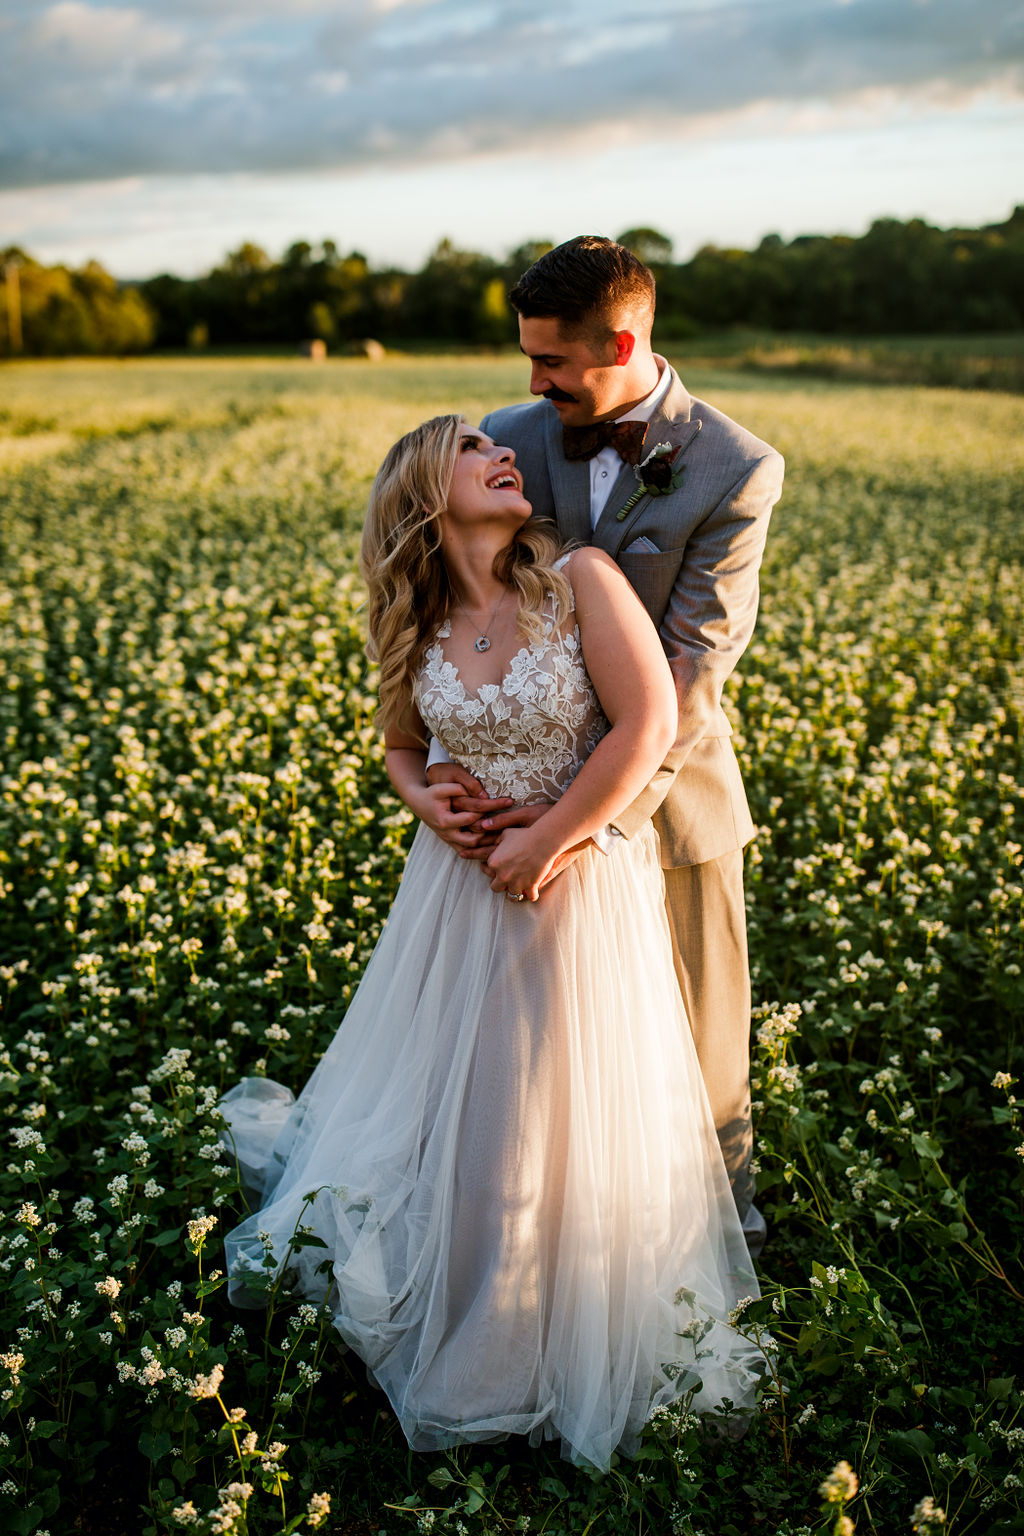 Farm wedding at Allenbrooke Farms photographed by John Myers Photography